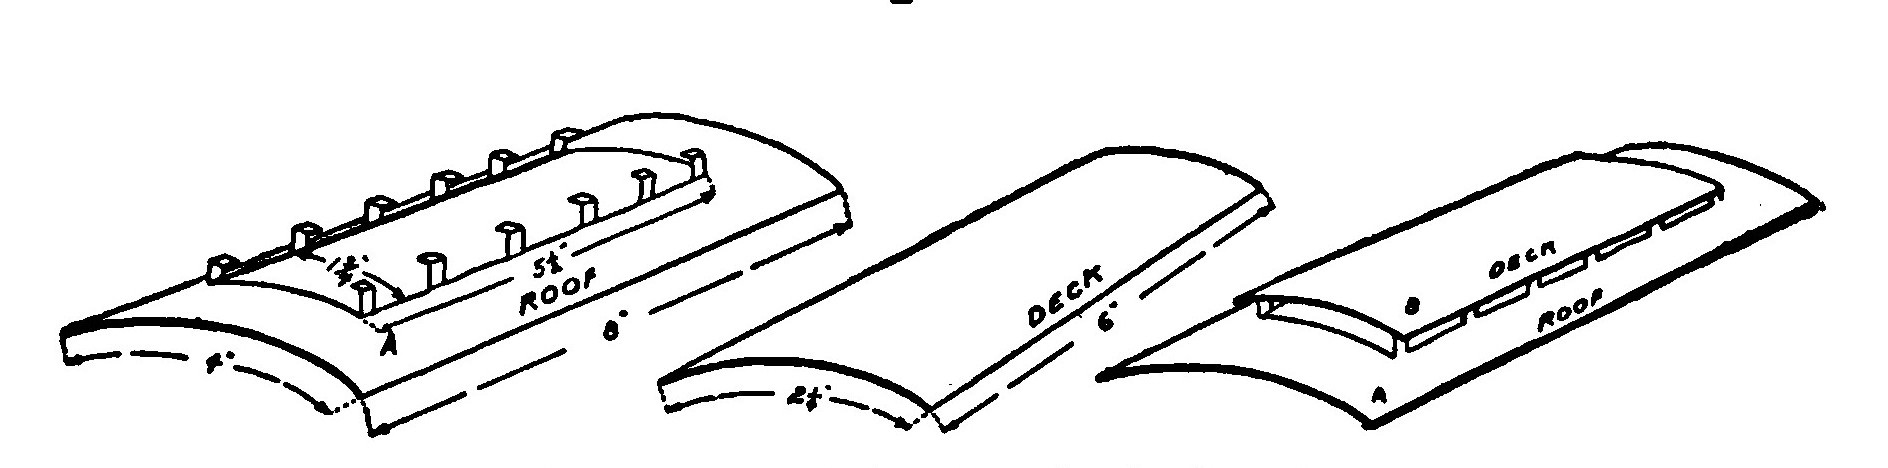 Fig. 270.—The Roof of the Car.